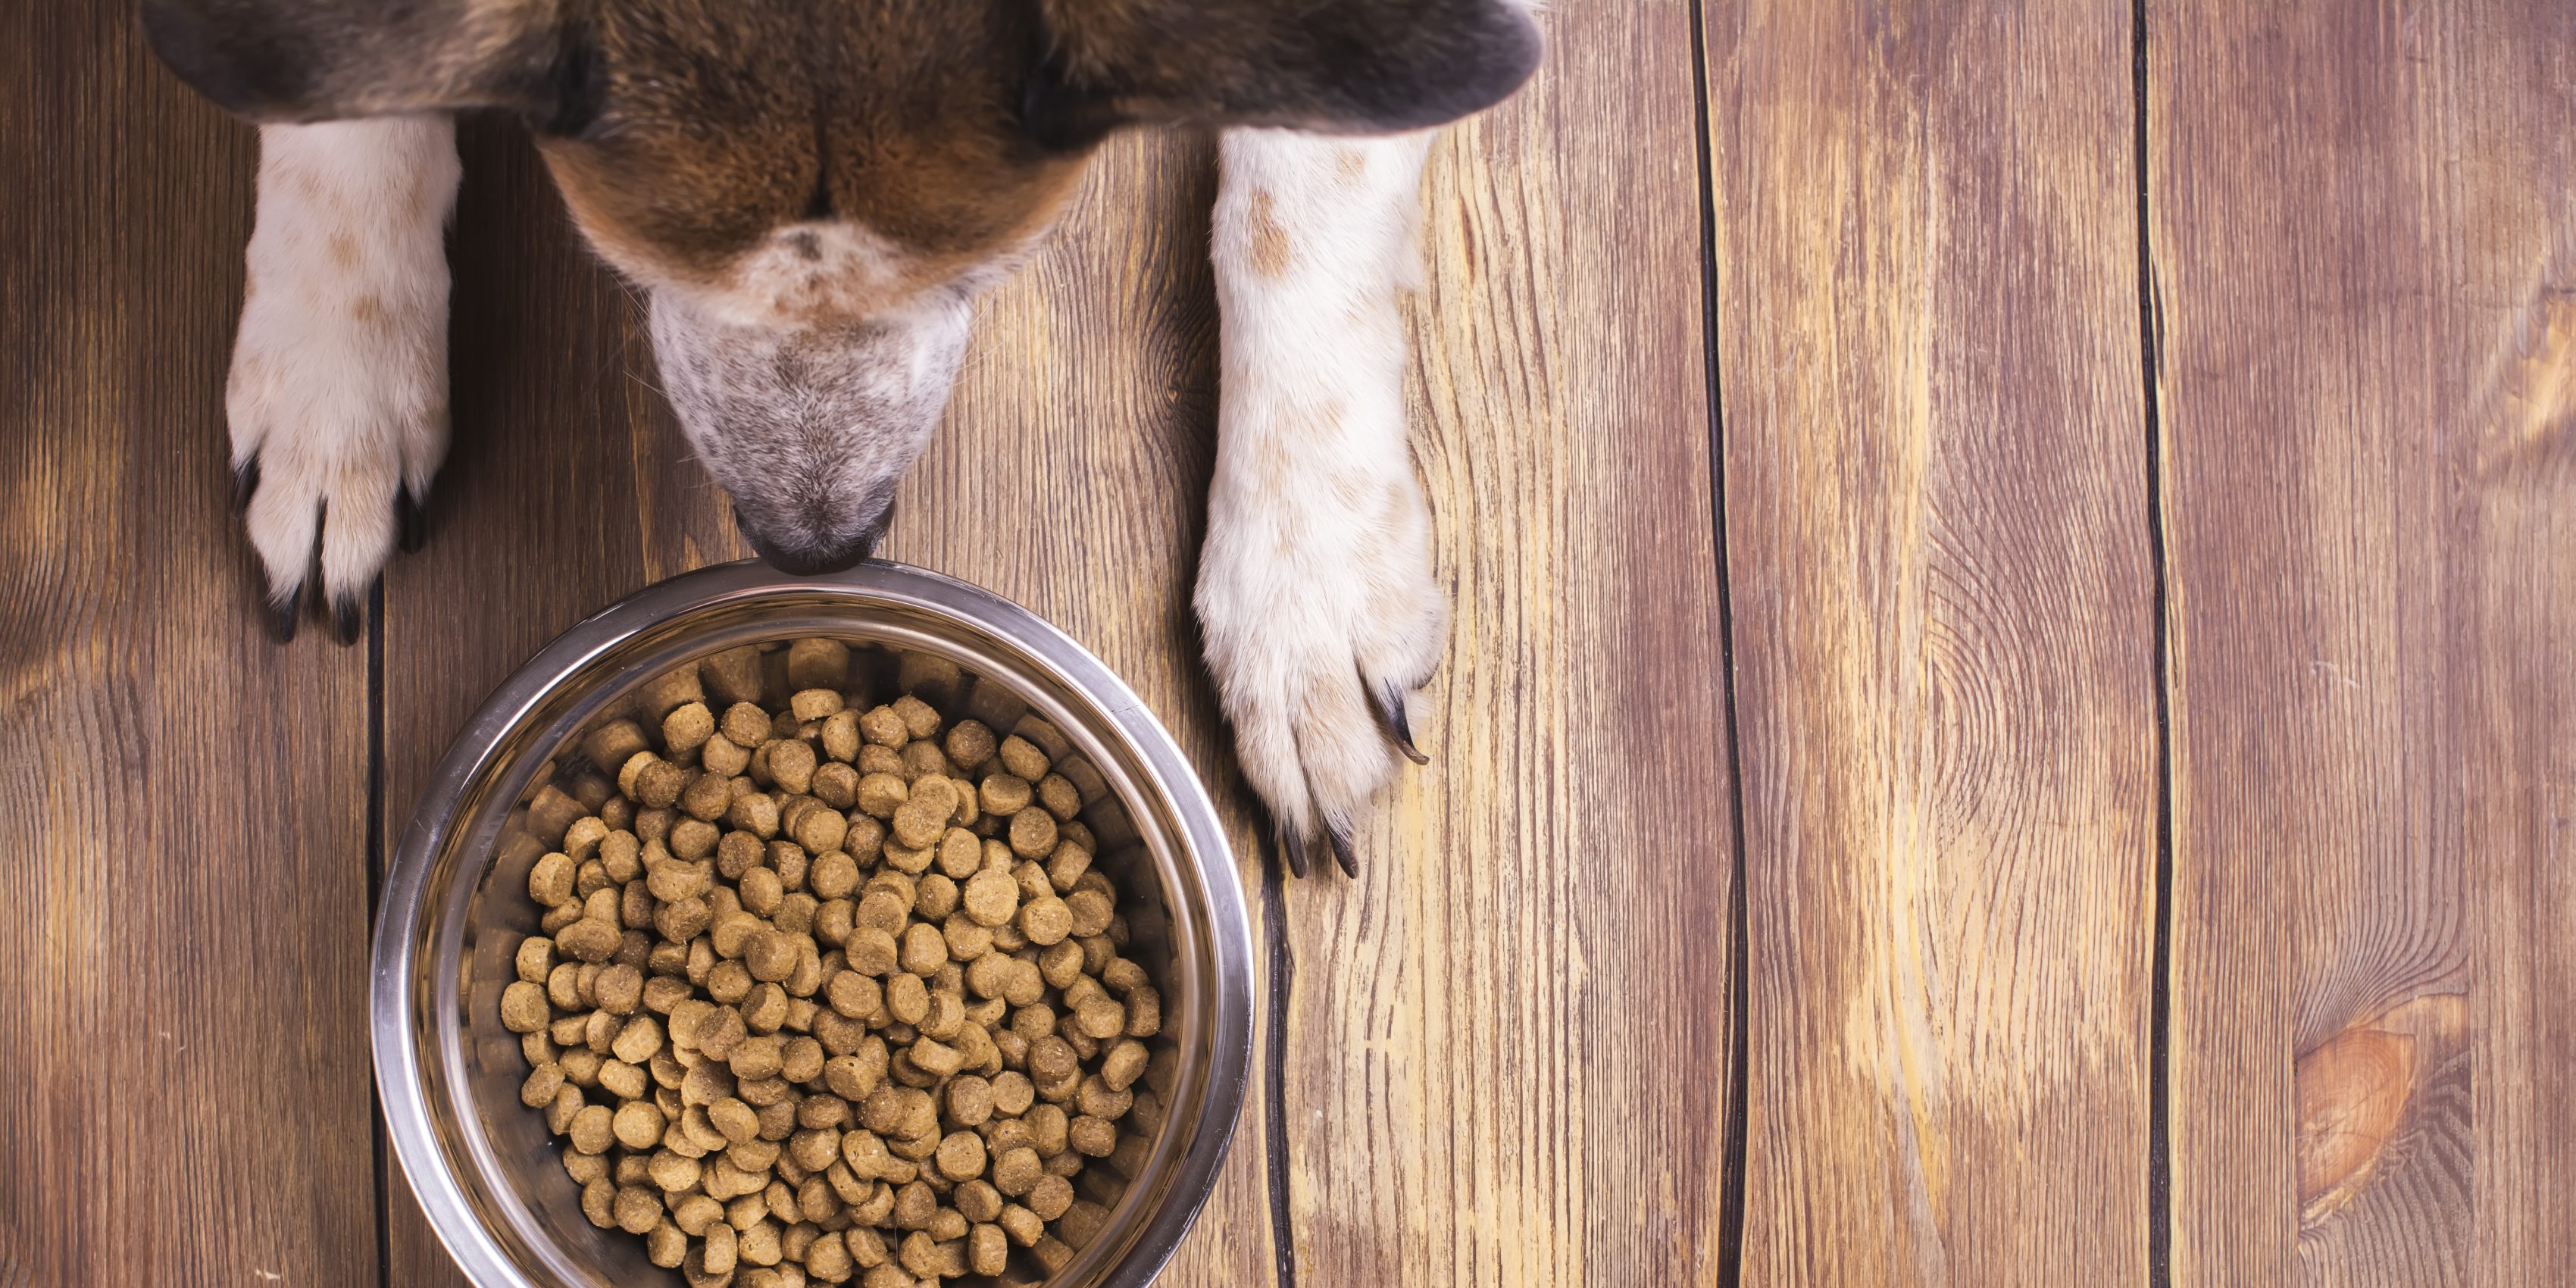 Bowl of dry kibble dog food and dog's paws